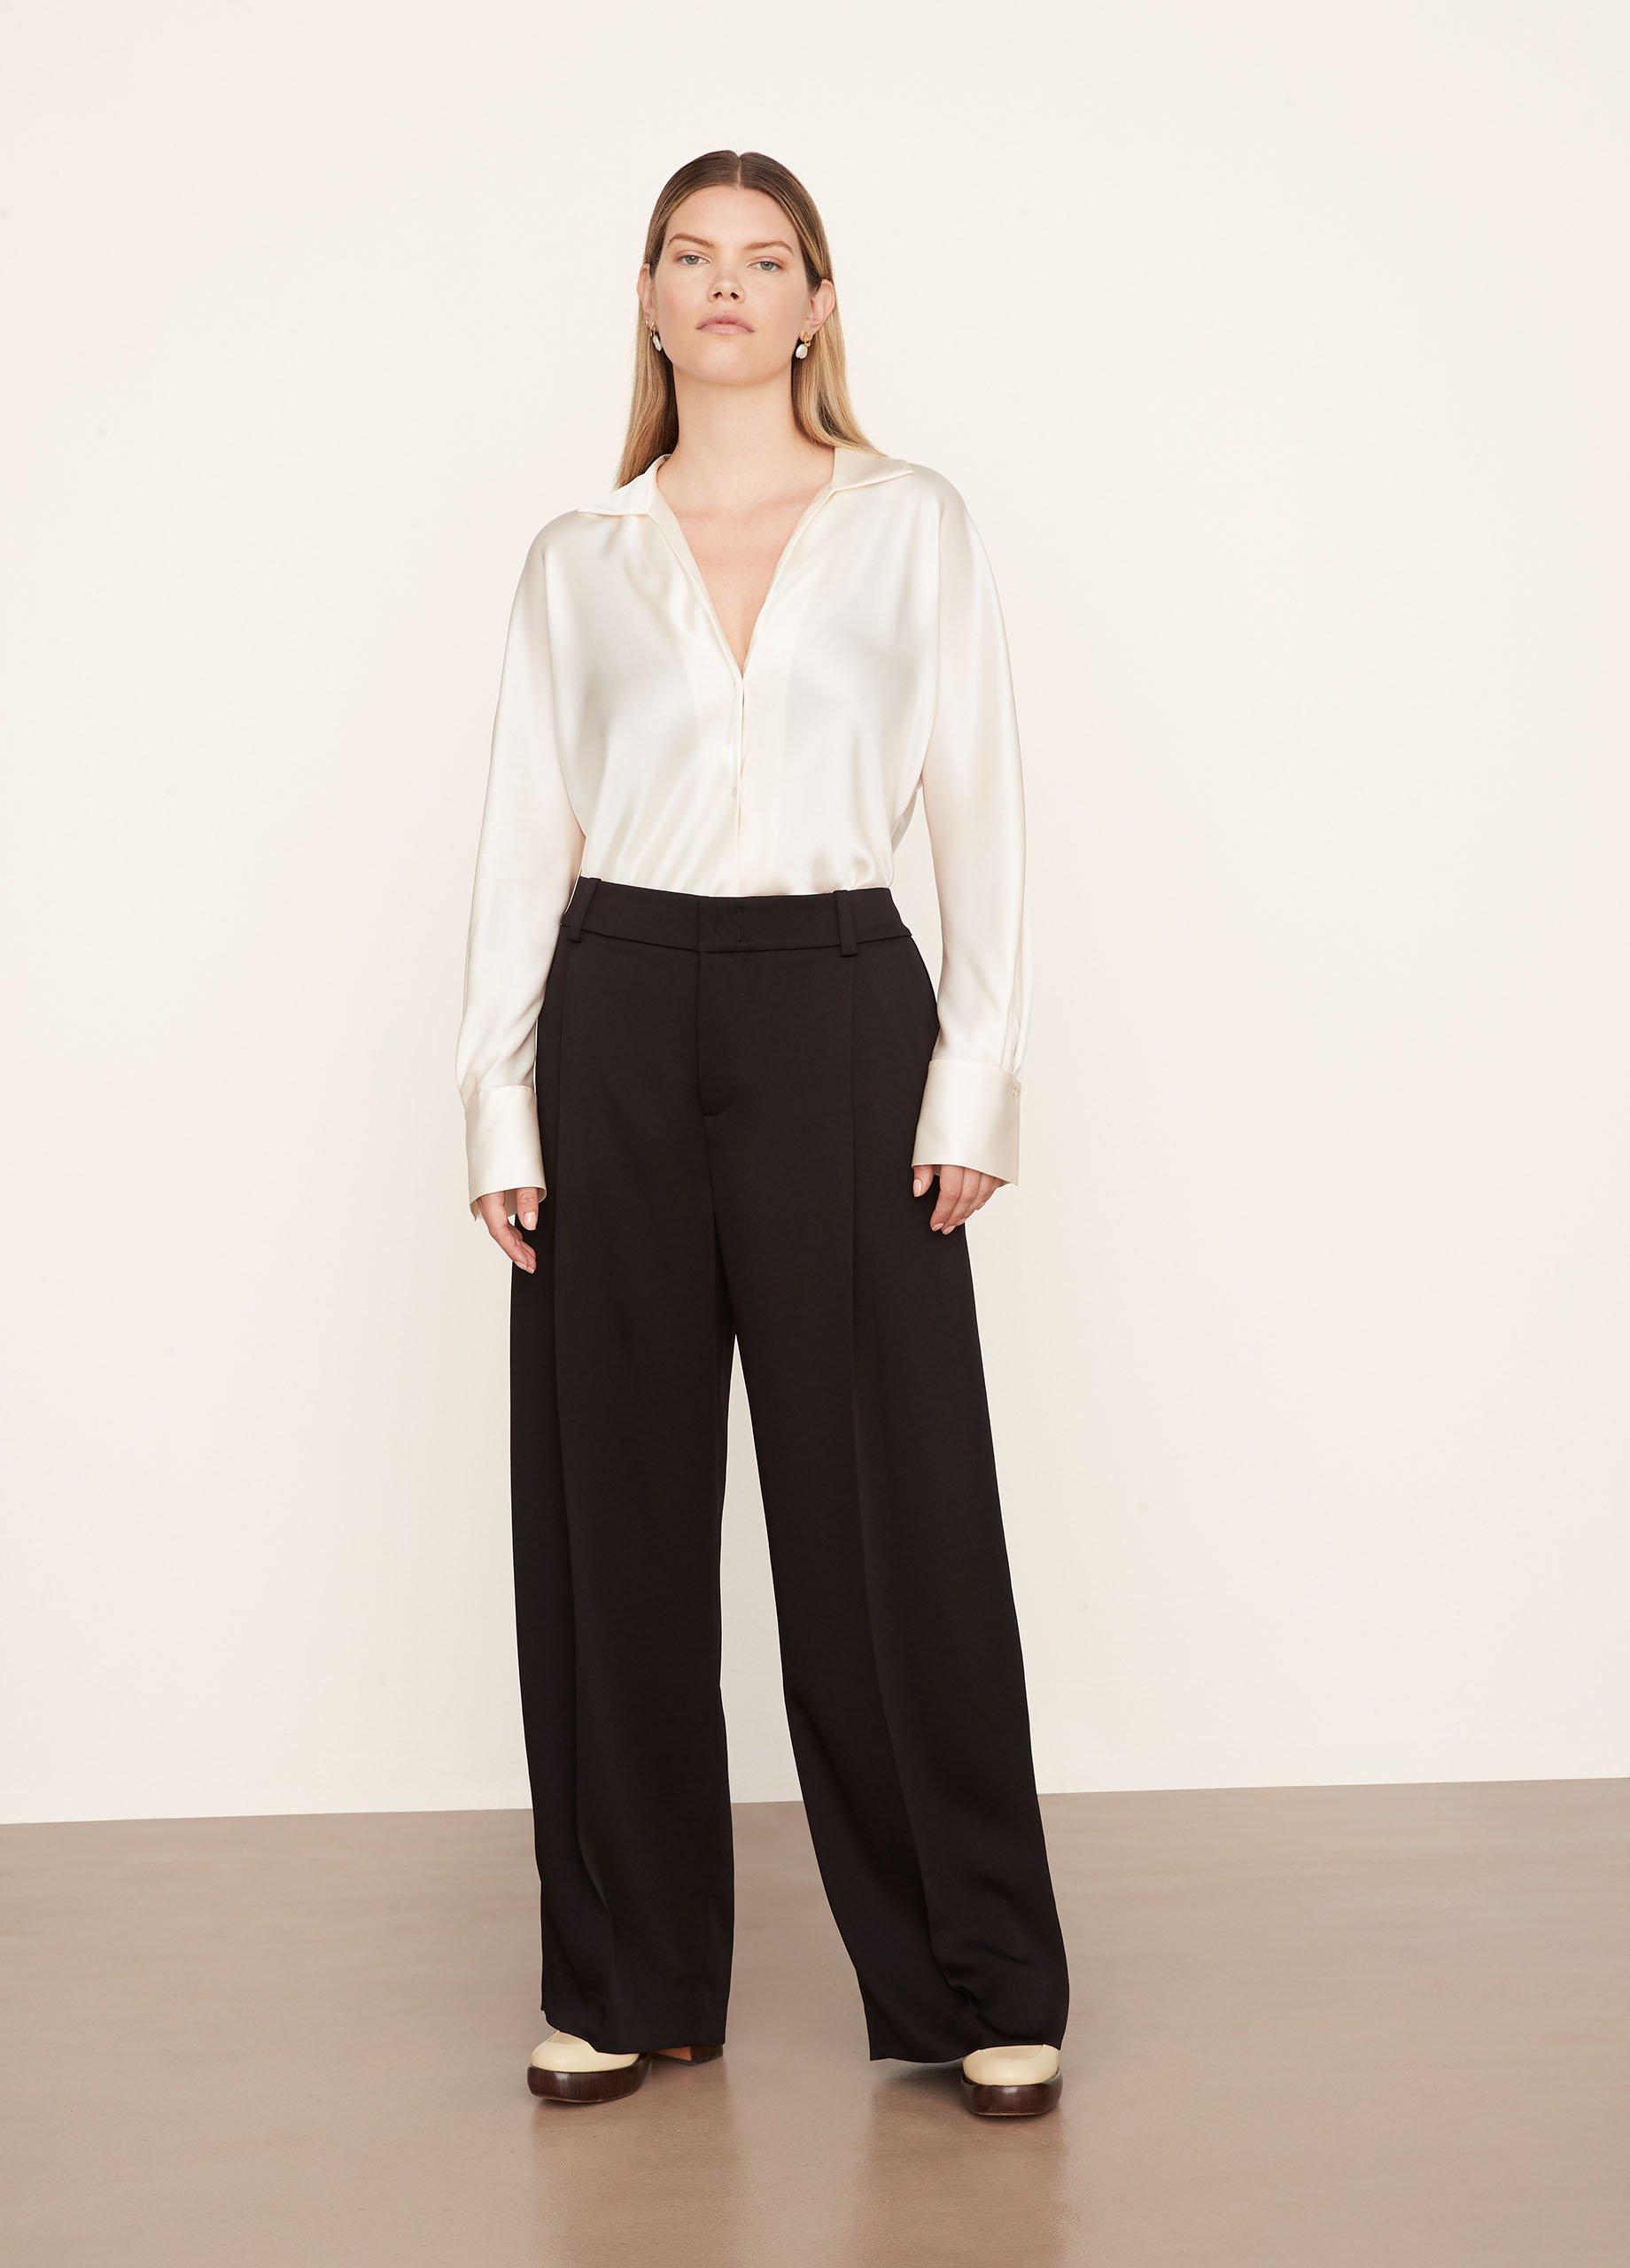 Made by Olivia Women's Relaxed Boot-Cut Office Pants Trousers